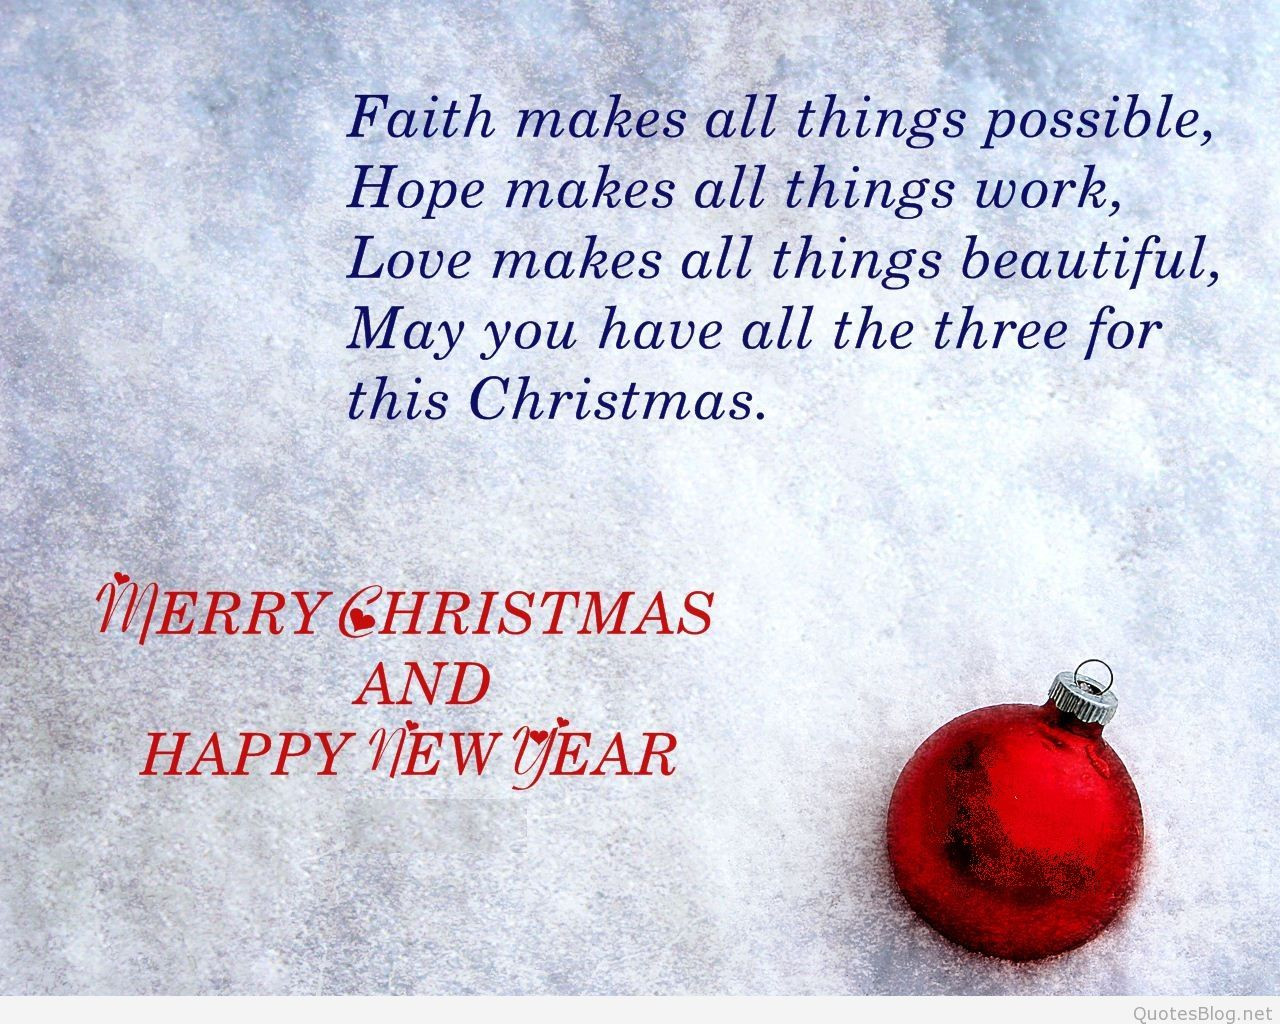 Merry Christmas And Happy New Year Quotes
 Happy new year authors images sayings wallpapers 2016